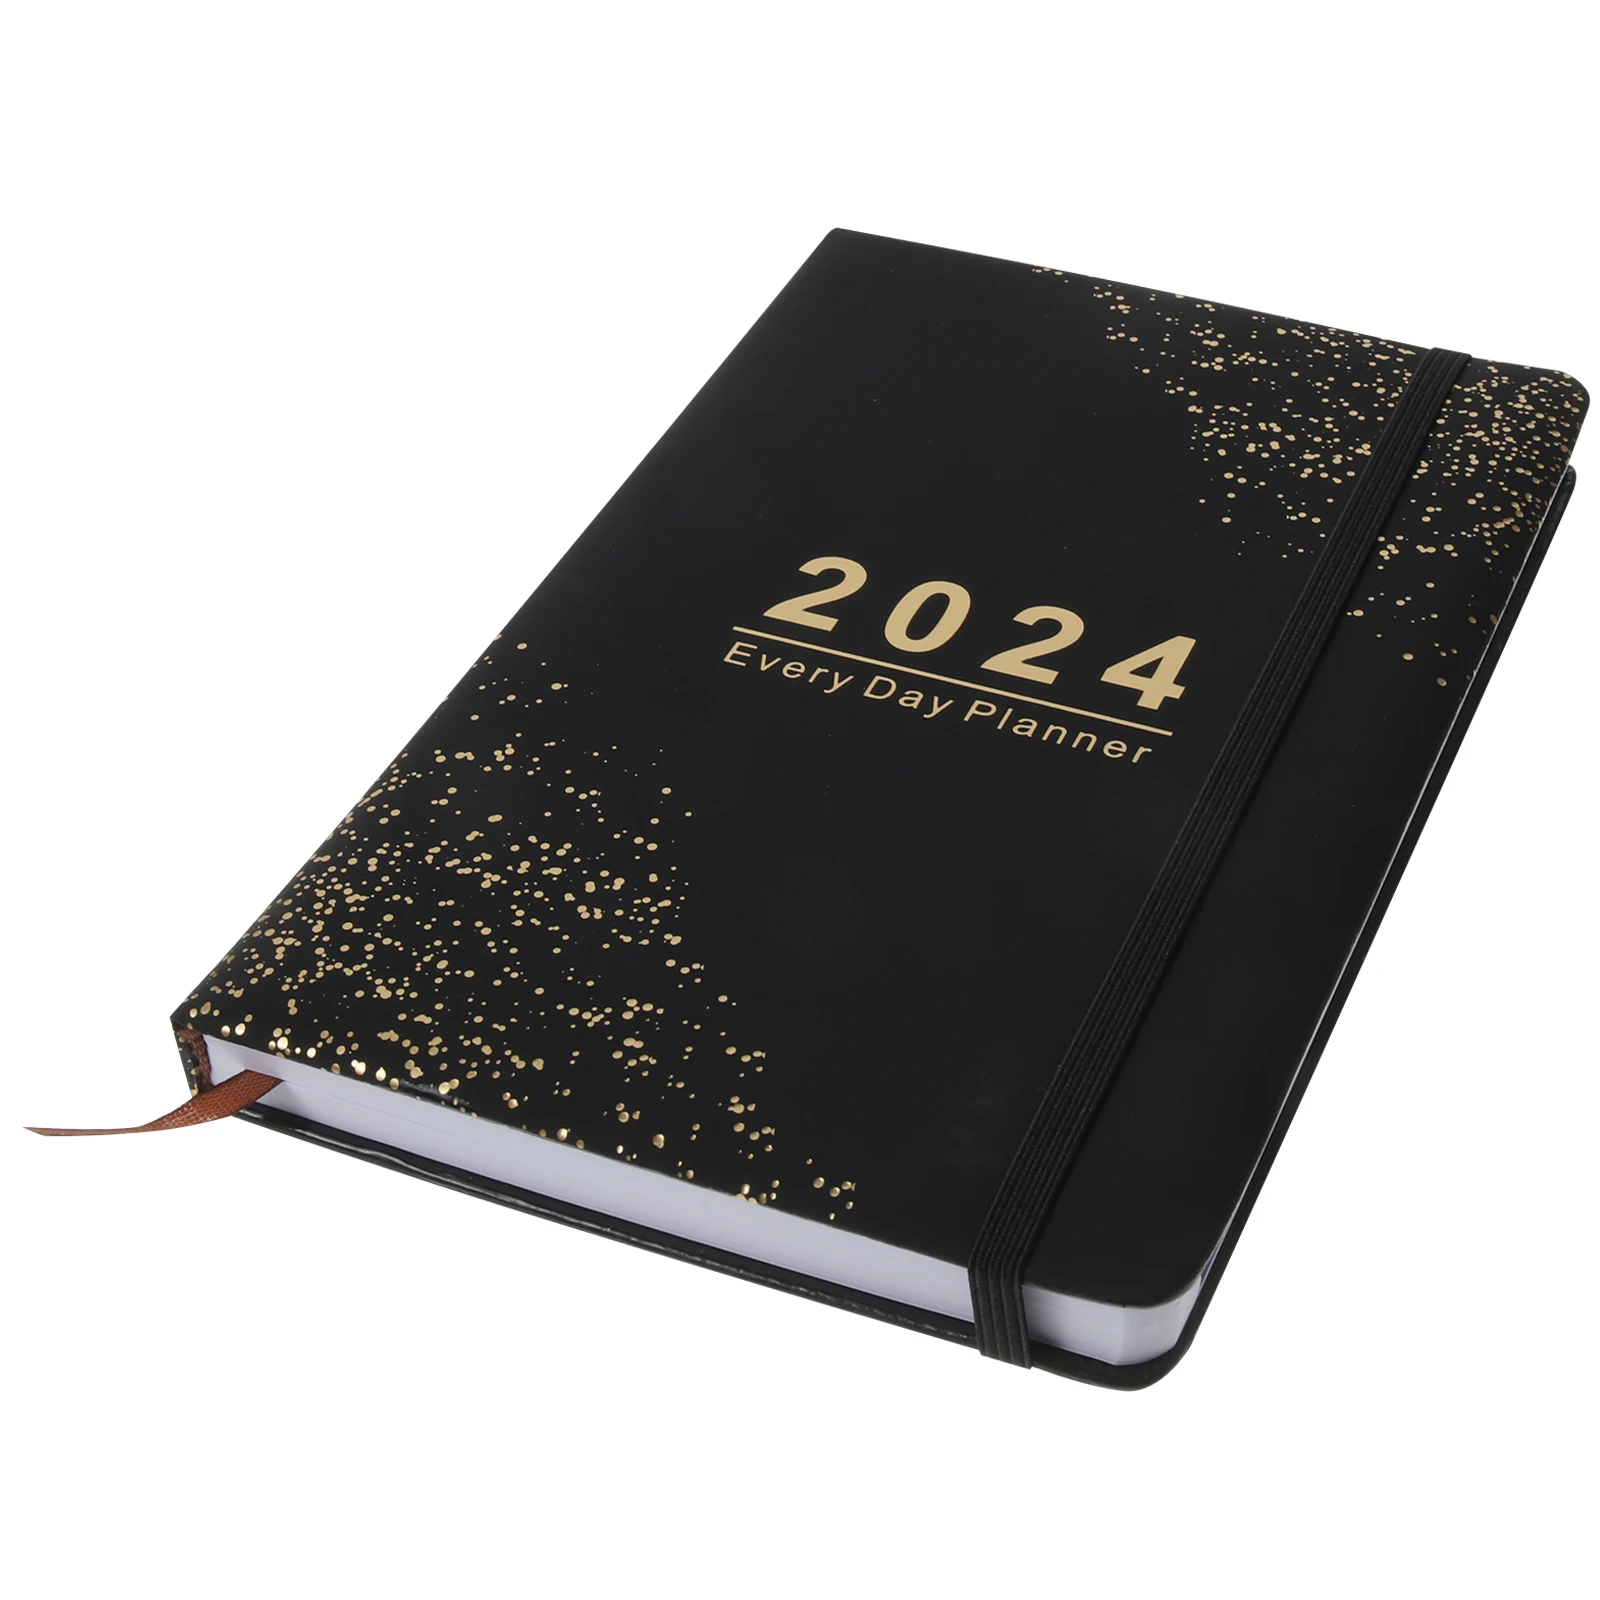 2024 Schedule Daily Schedule English Notebook Schedule Leather Cover Daily Schedule Schedule This Log Table Monthly Planner agenda 2022 planner organizer notebook and journal a5 diary stationery notepad daily schedule sketchbook office school note book